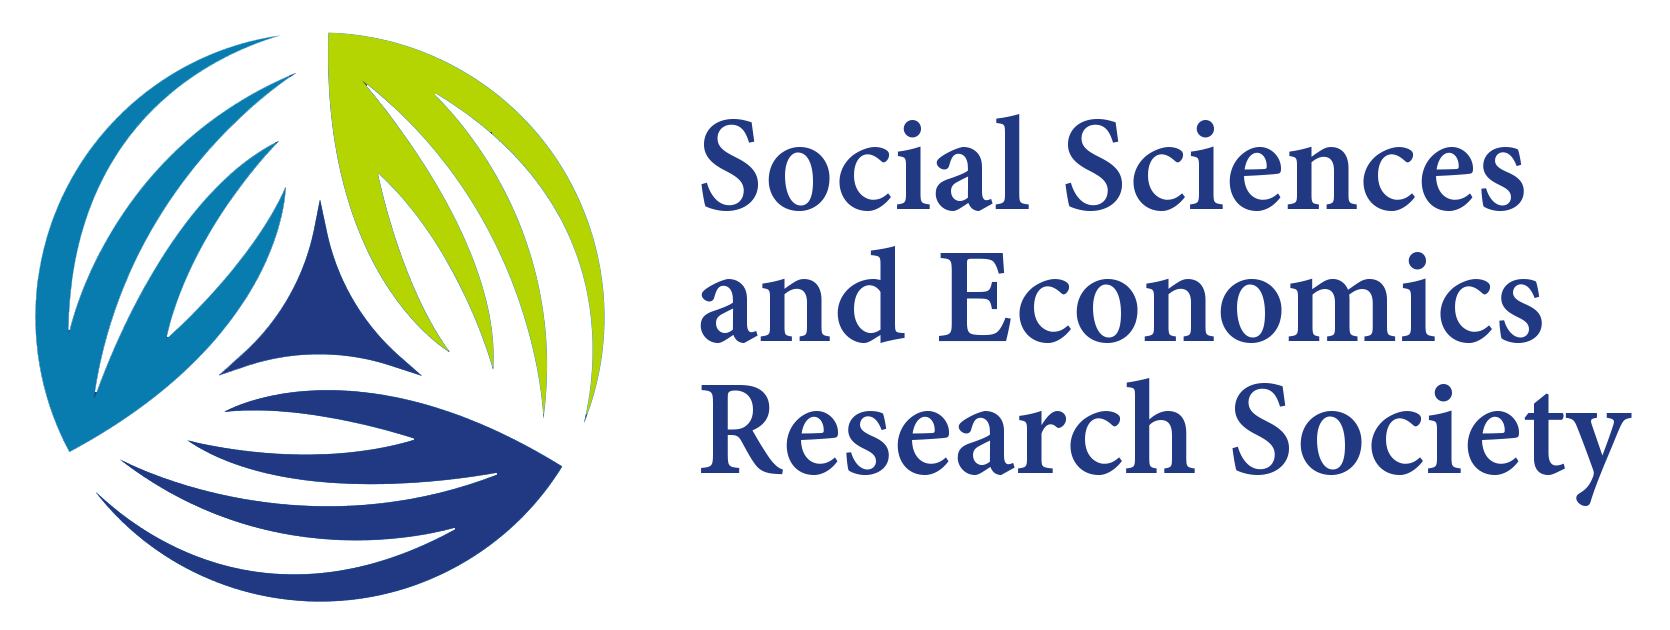 SSERS International Conference on  Applied Business Research, Humanities, Social Sciences, Entrepreneurship & Economics